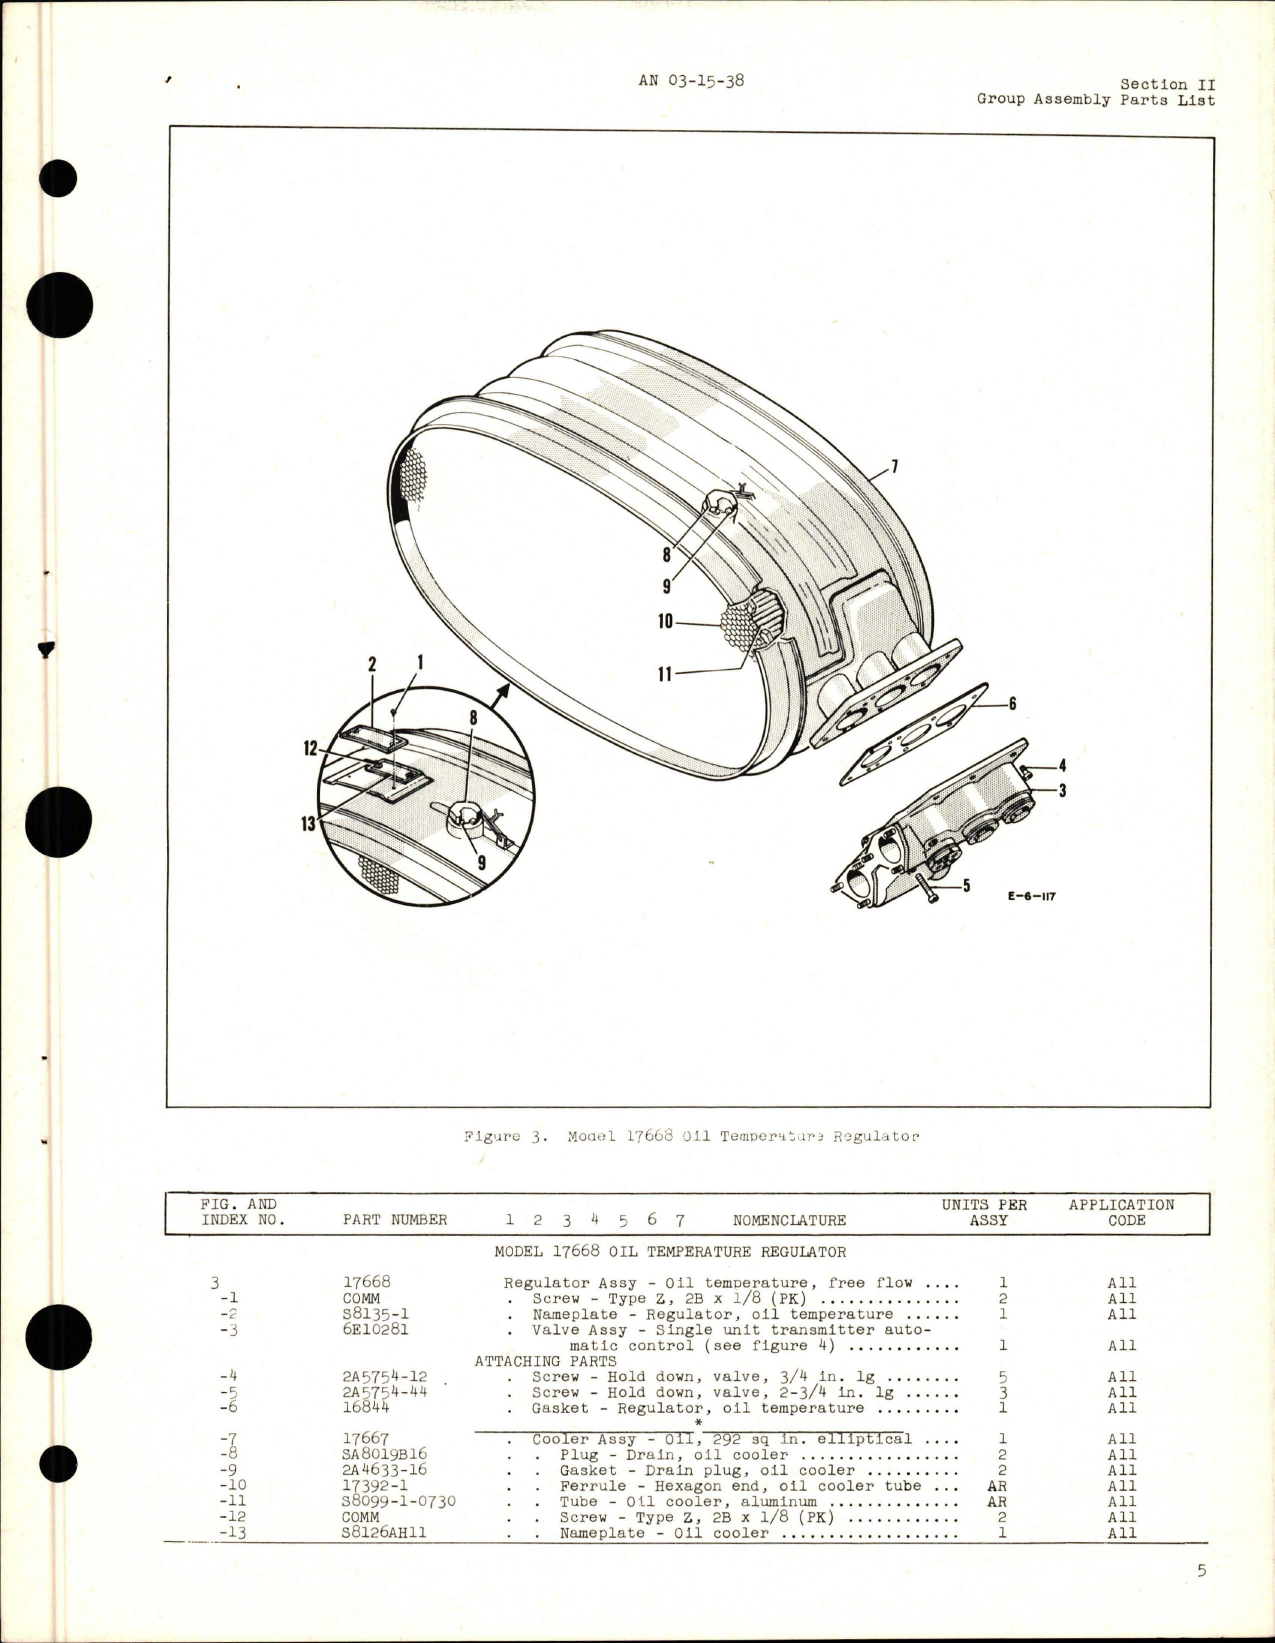 Sample page 7 from AirCorps Library document: Parts Catalog for Oil Temperature Regulators - Oil Coolers - Valves